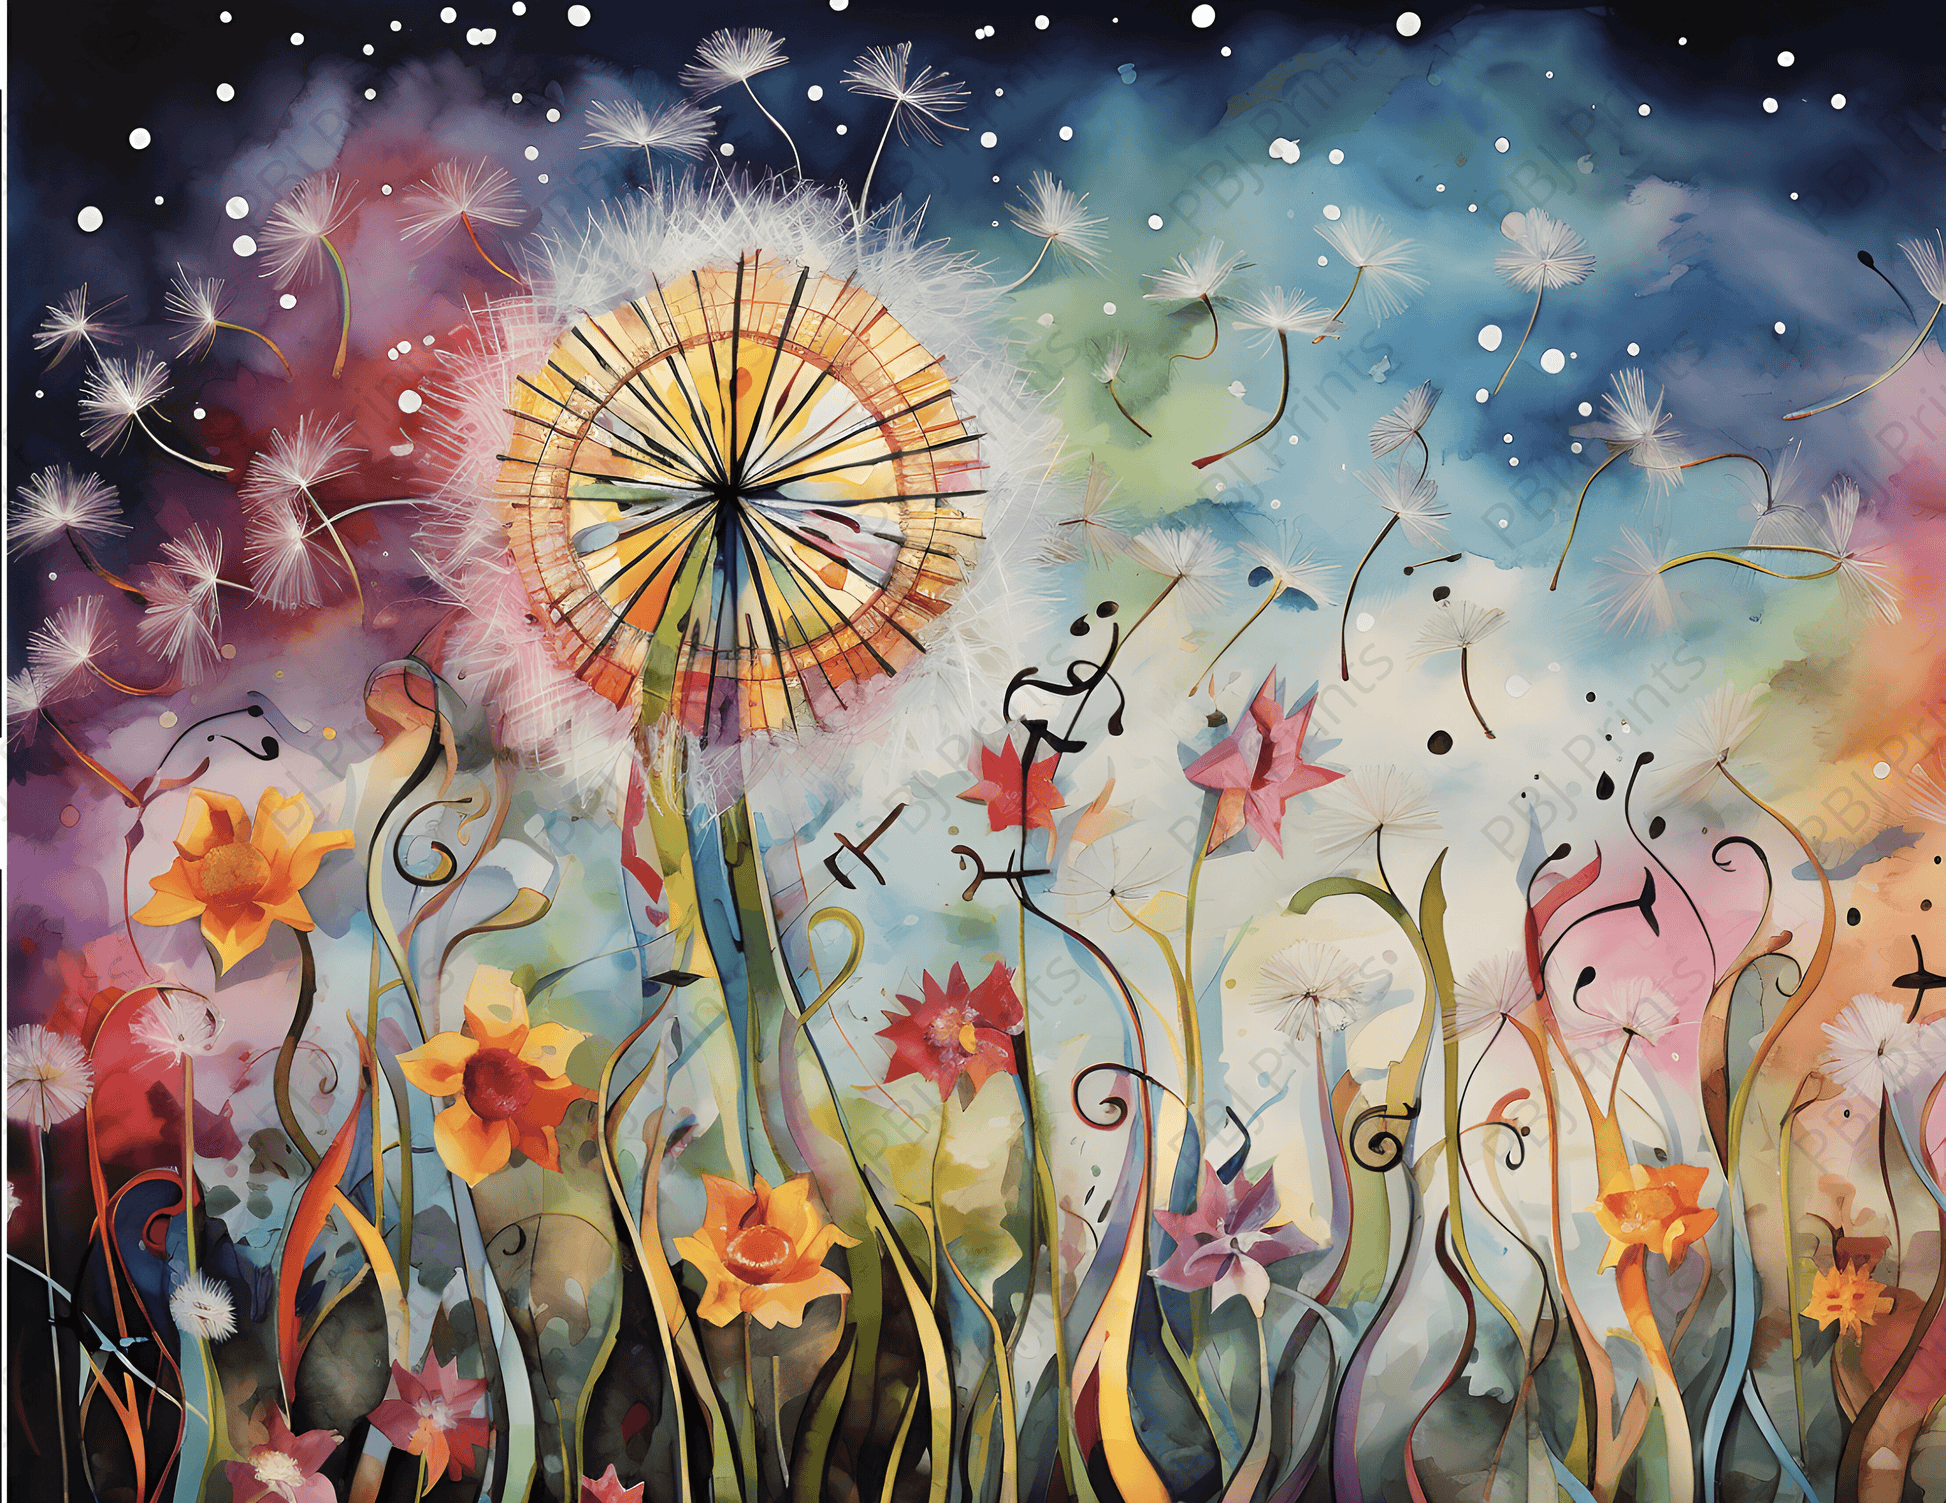 Dandelion Dancing - Artist by 2chattychicks teaching eclectic creations - 